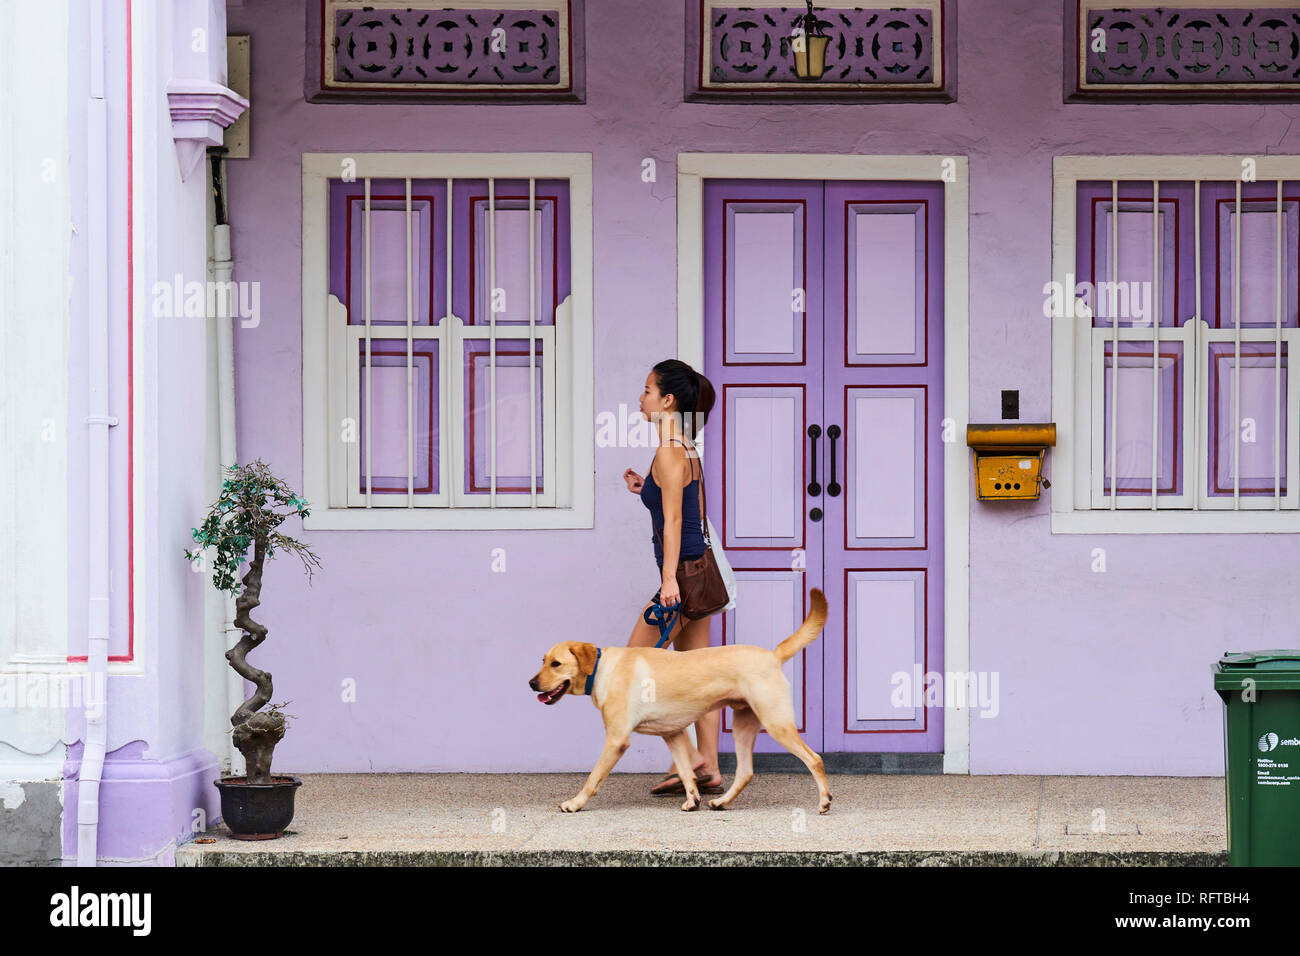 Peranakan houses in Euros District at the east of the city, Singapore, Southeast Asia, Asia Stock Photo